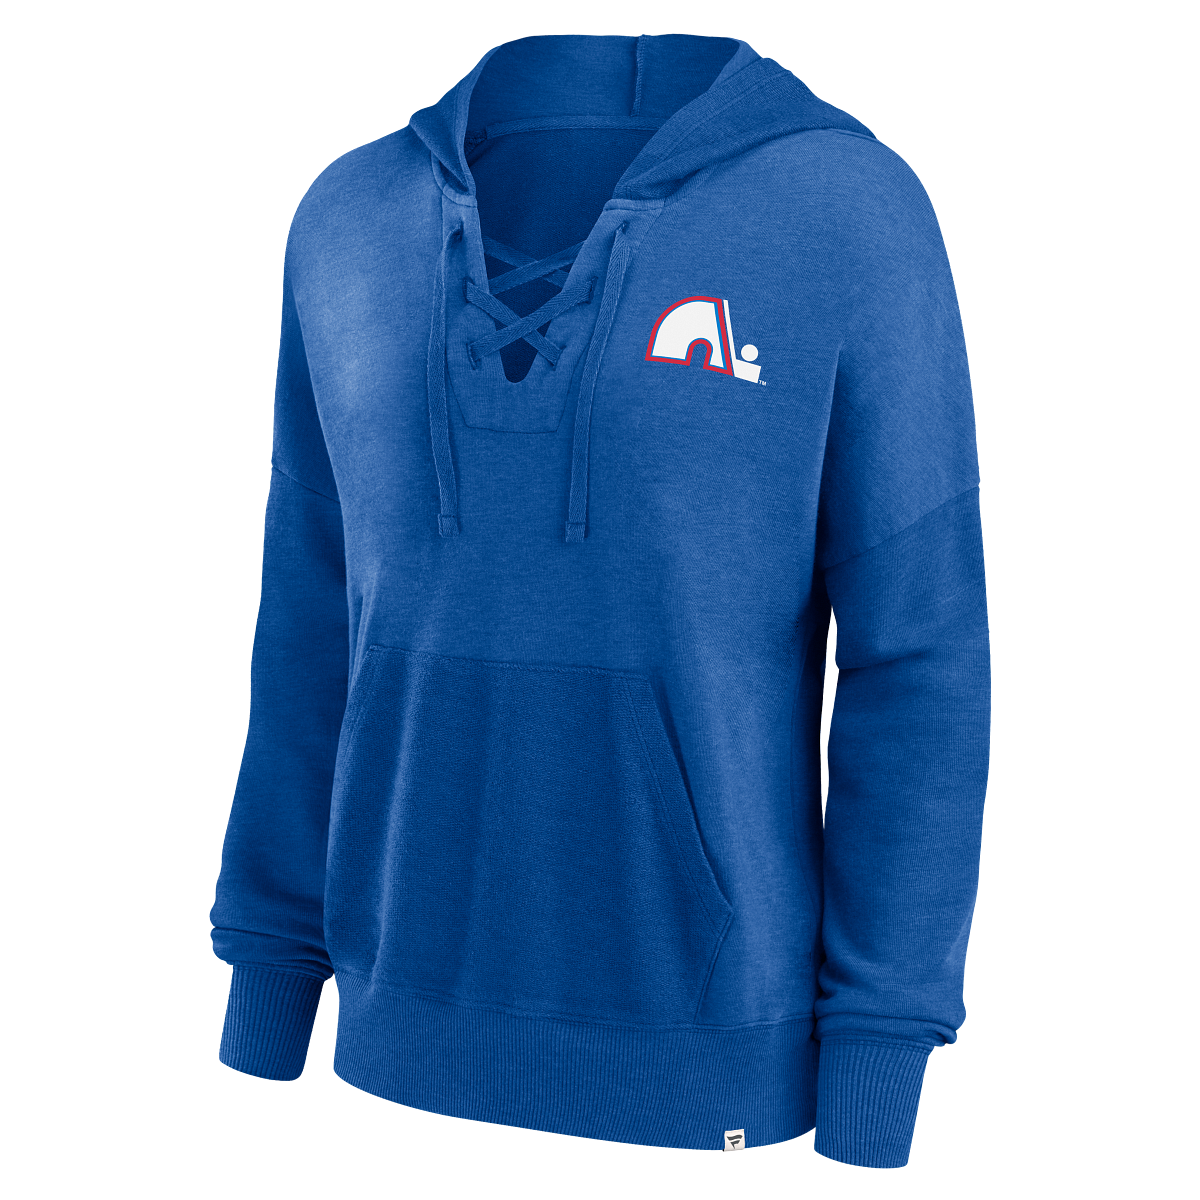 Nordiques Ladies French Terry P/O Hoody